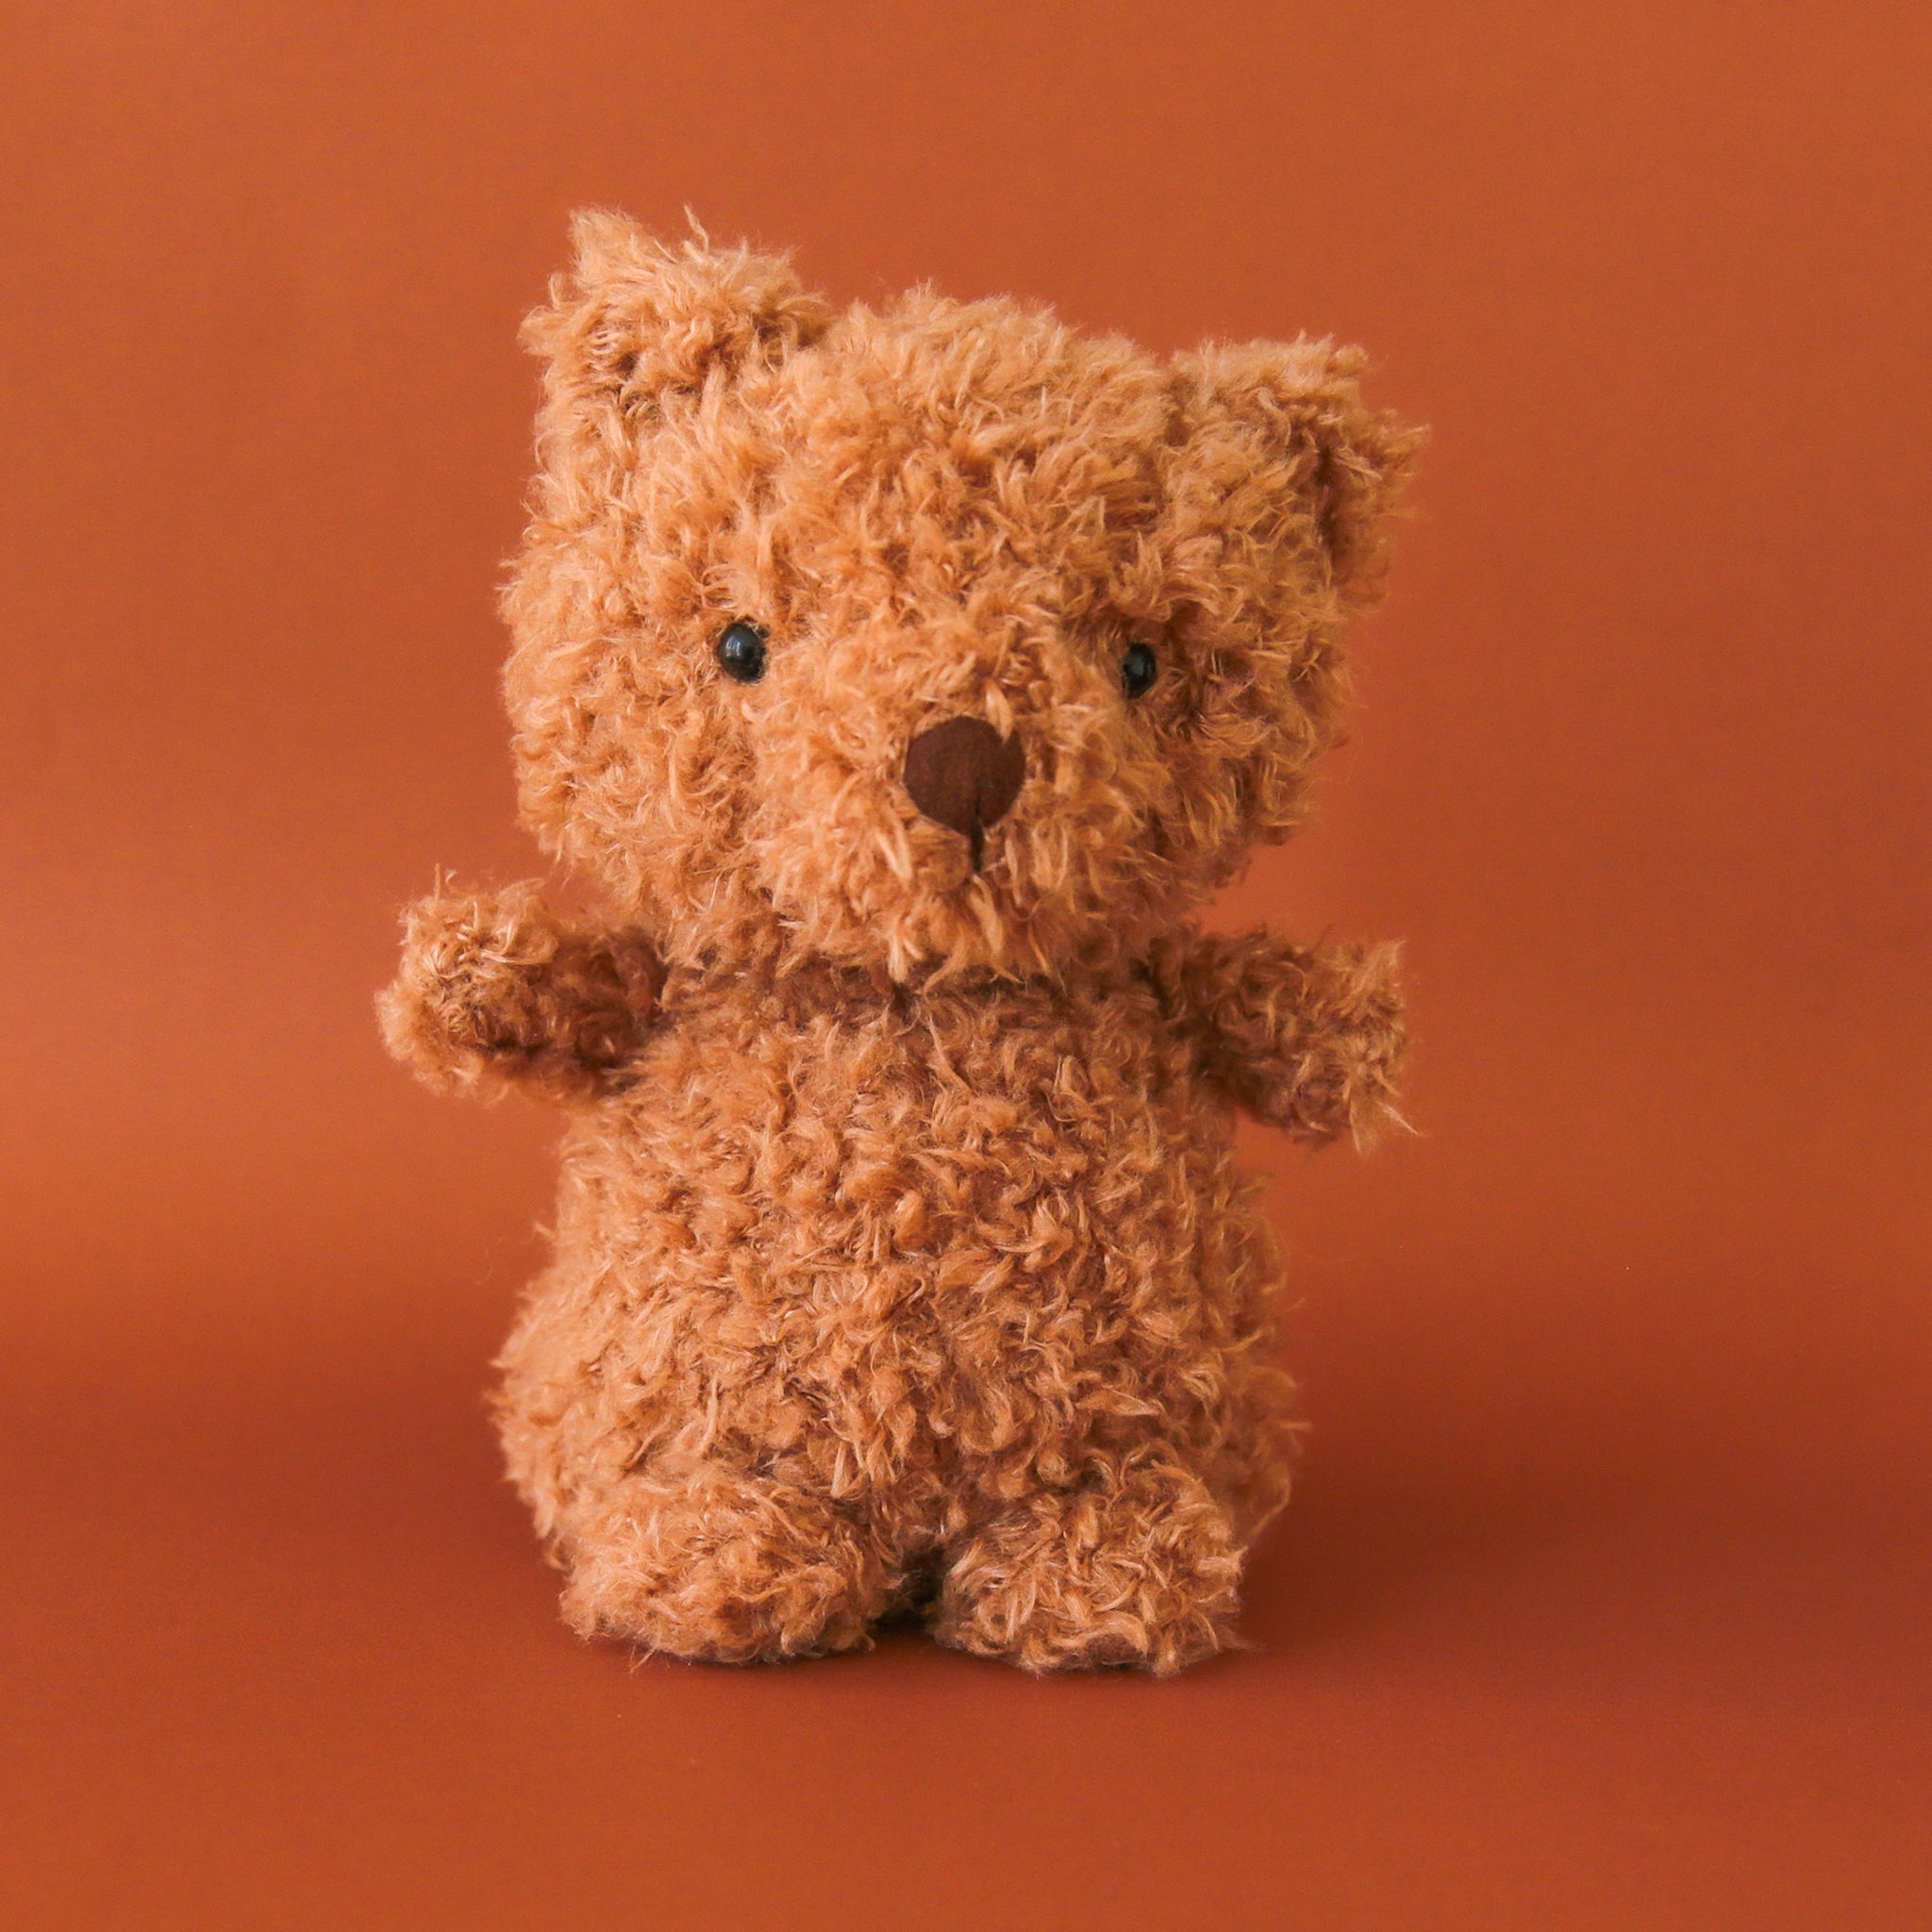 A small cuddly bear stuffed animal with chestnut brown fur, a brown nose and small little ears.